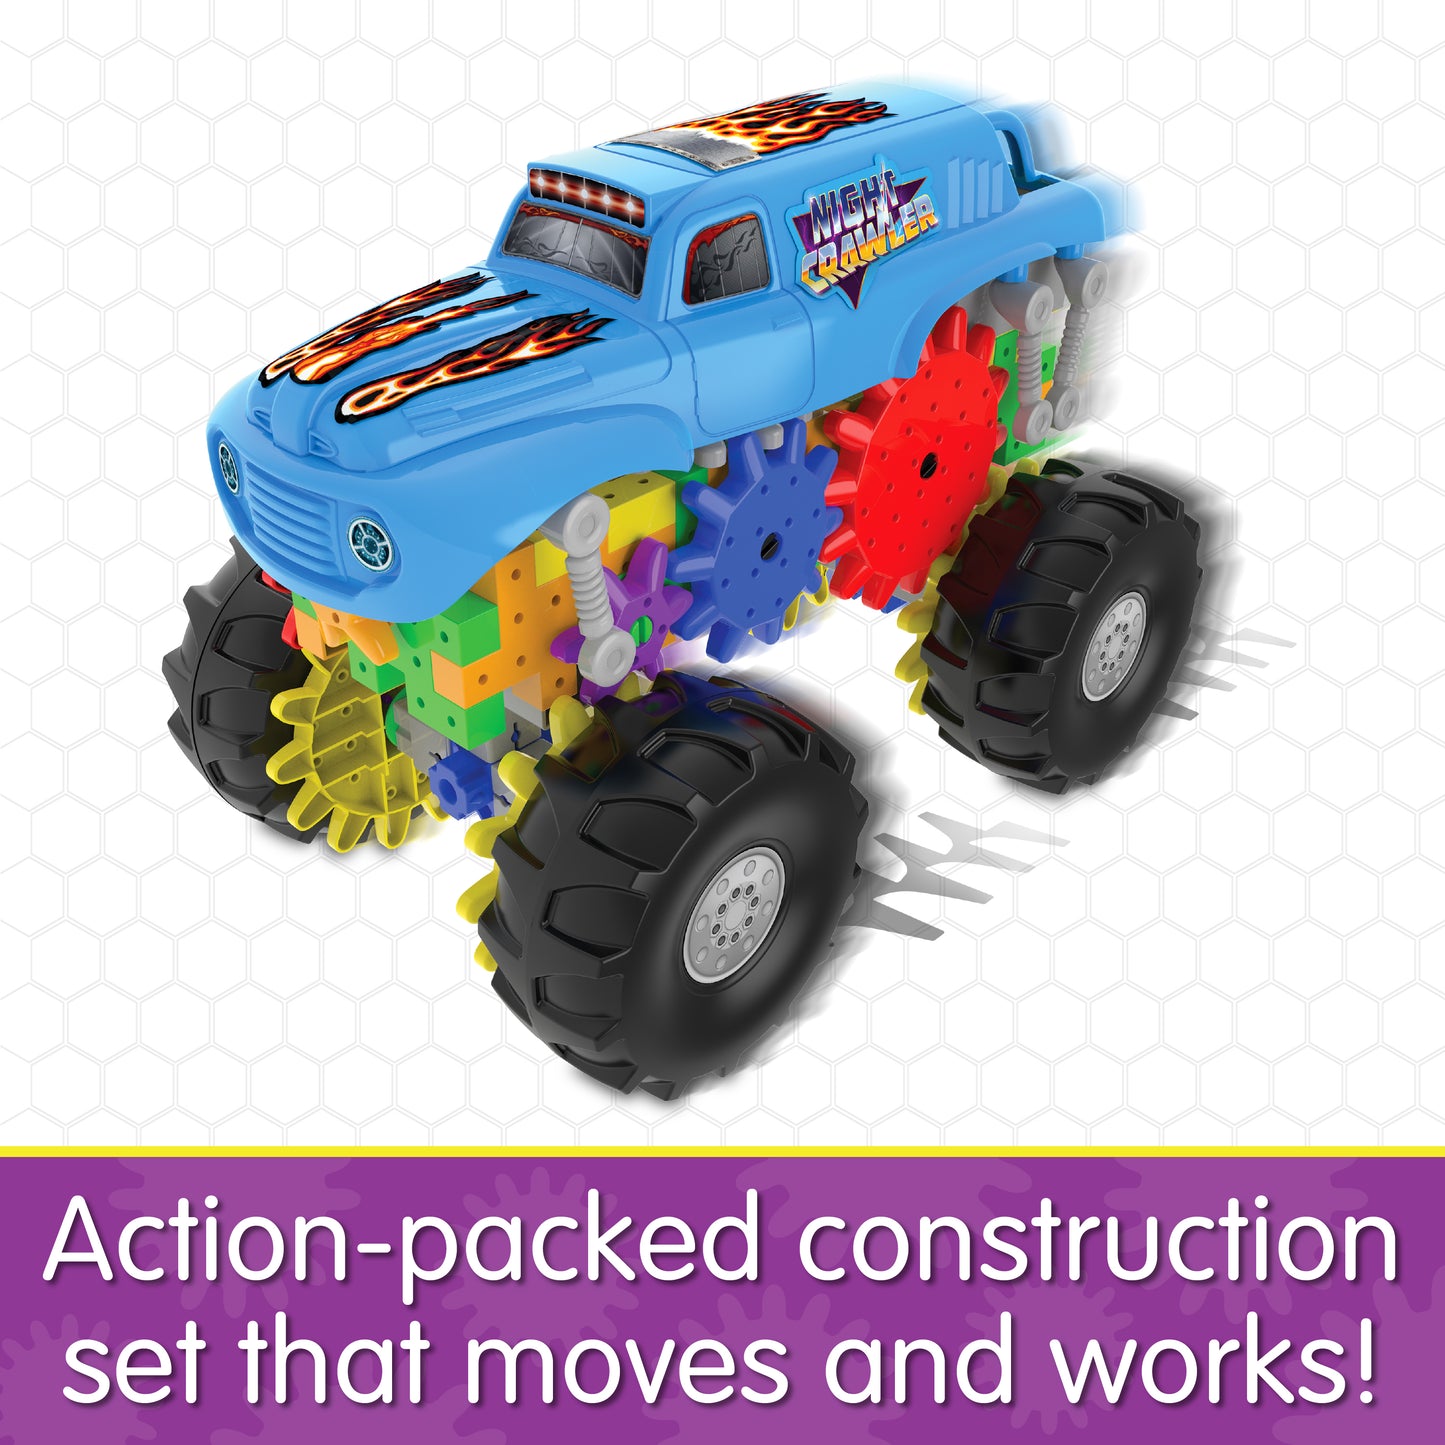 Infographic about Night Crawler that says, "Action-packed construction set that moves and works!"